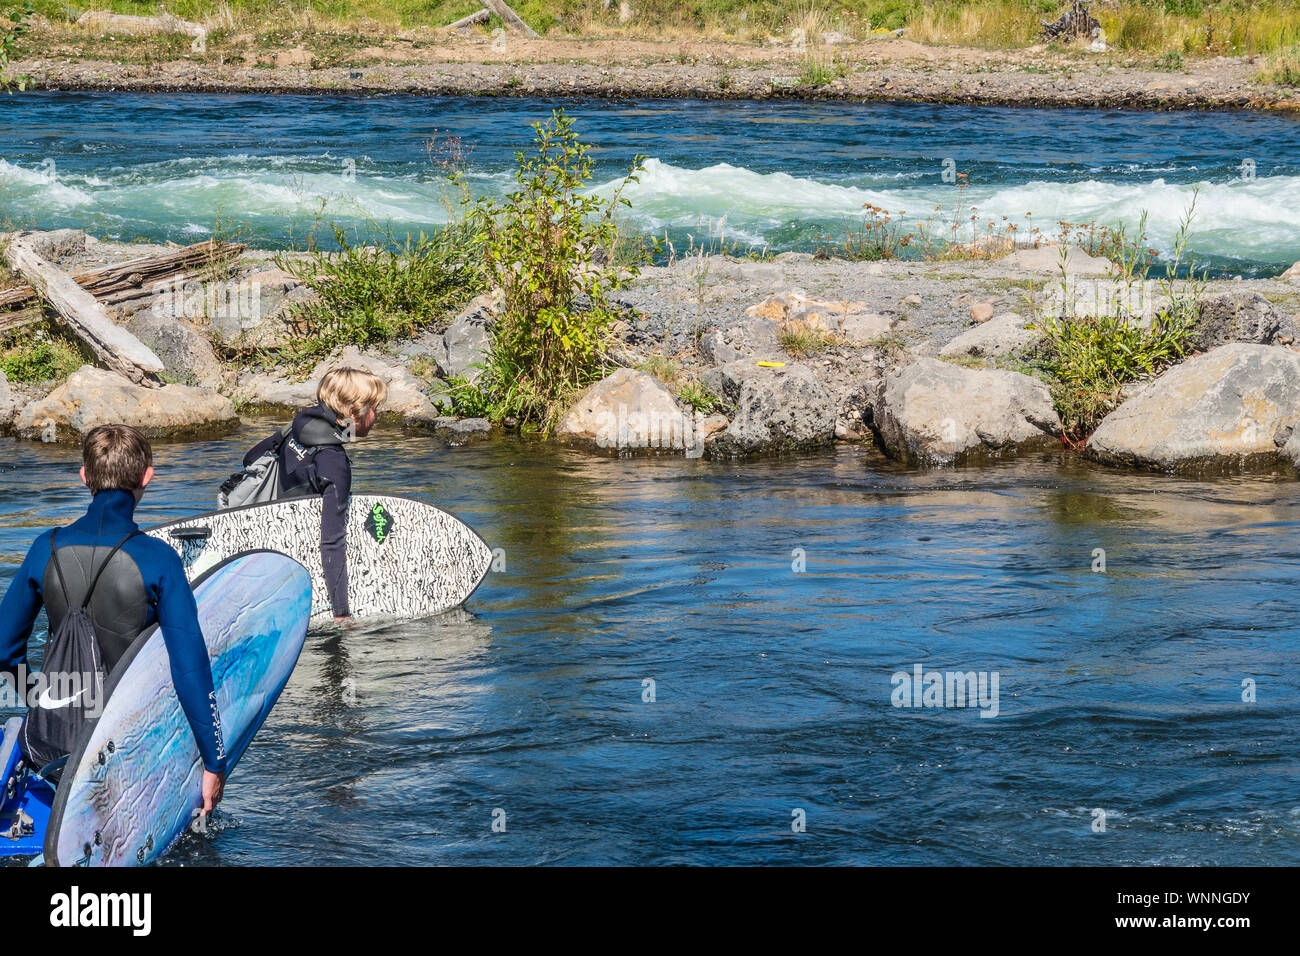 Two teenage river surfers carry their surf boards and cross part of the Deschutes River to get to the surfing spot in the river. Stock Photo